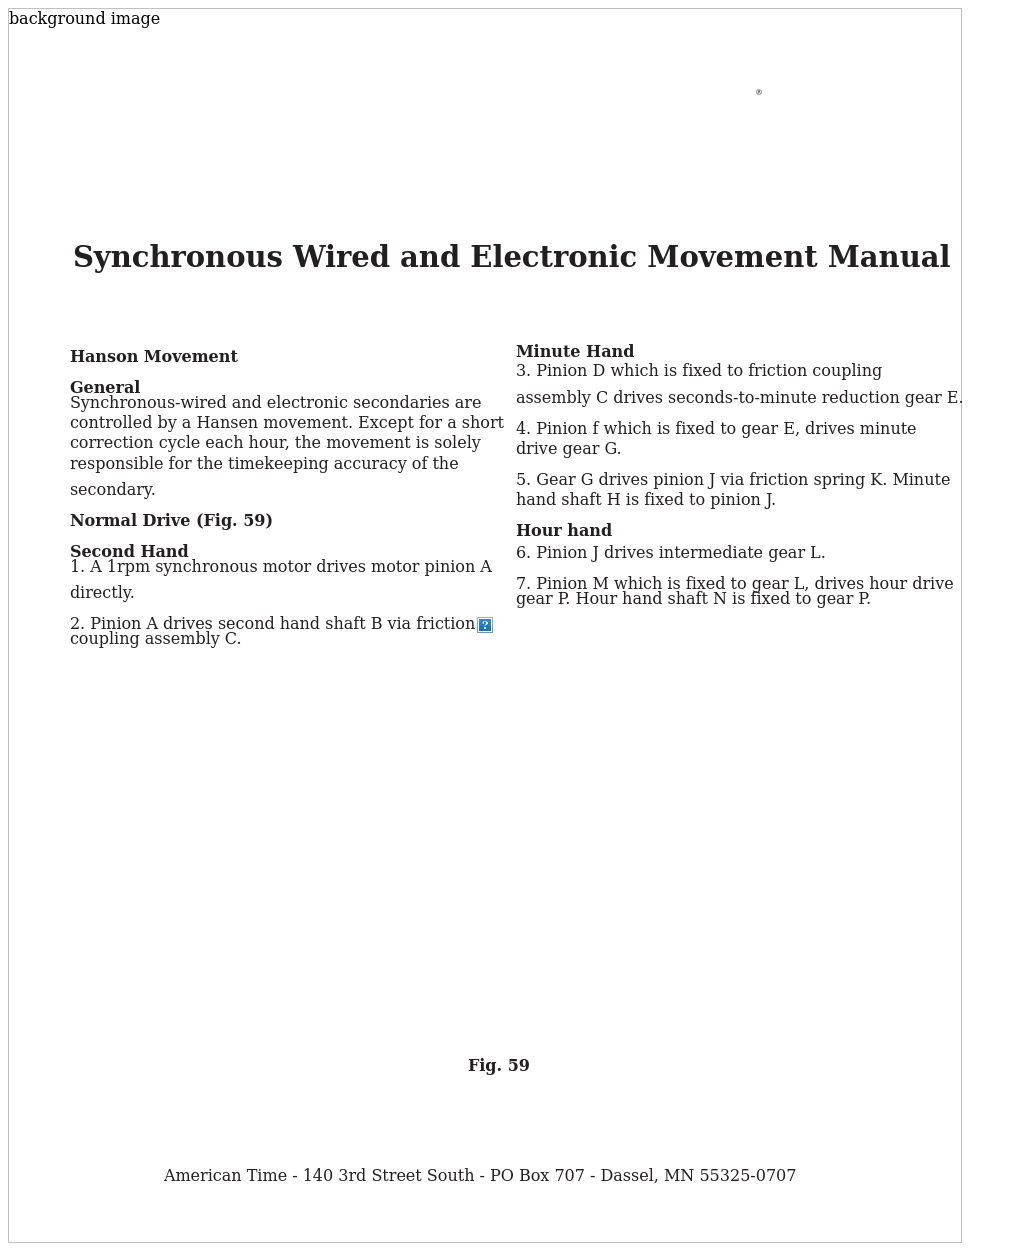 Synchronous Wired and Electronic Movement